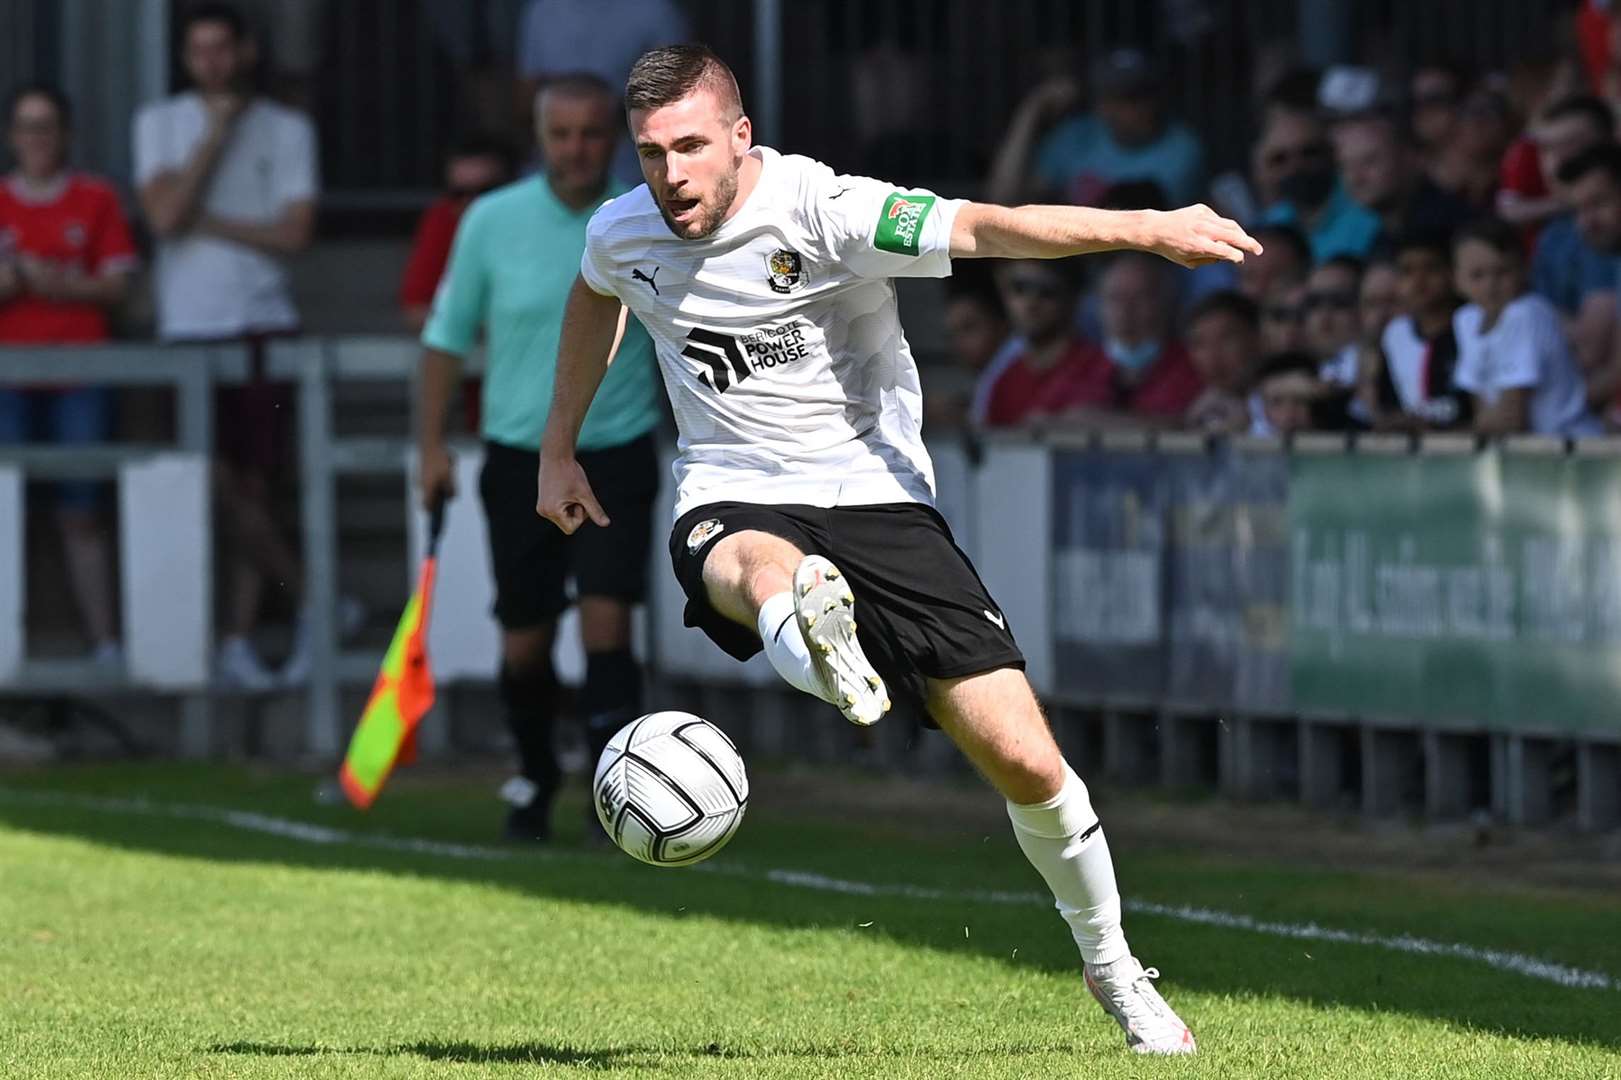 Danny Leonard has impressed for Dartford at the start of this season. Picture: Keith Gillard